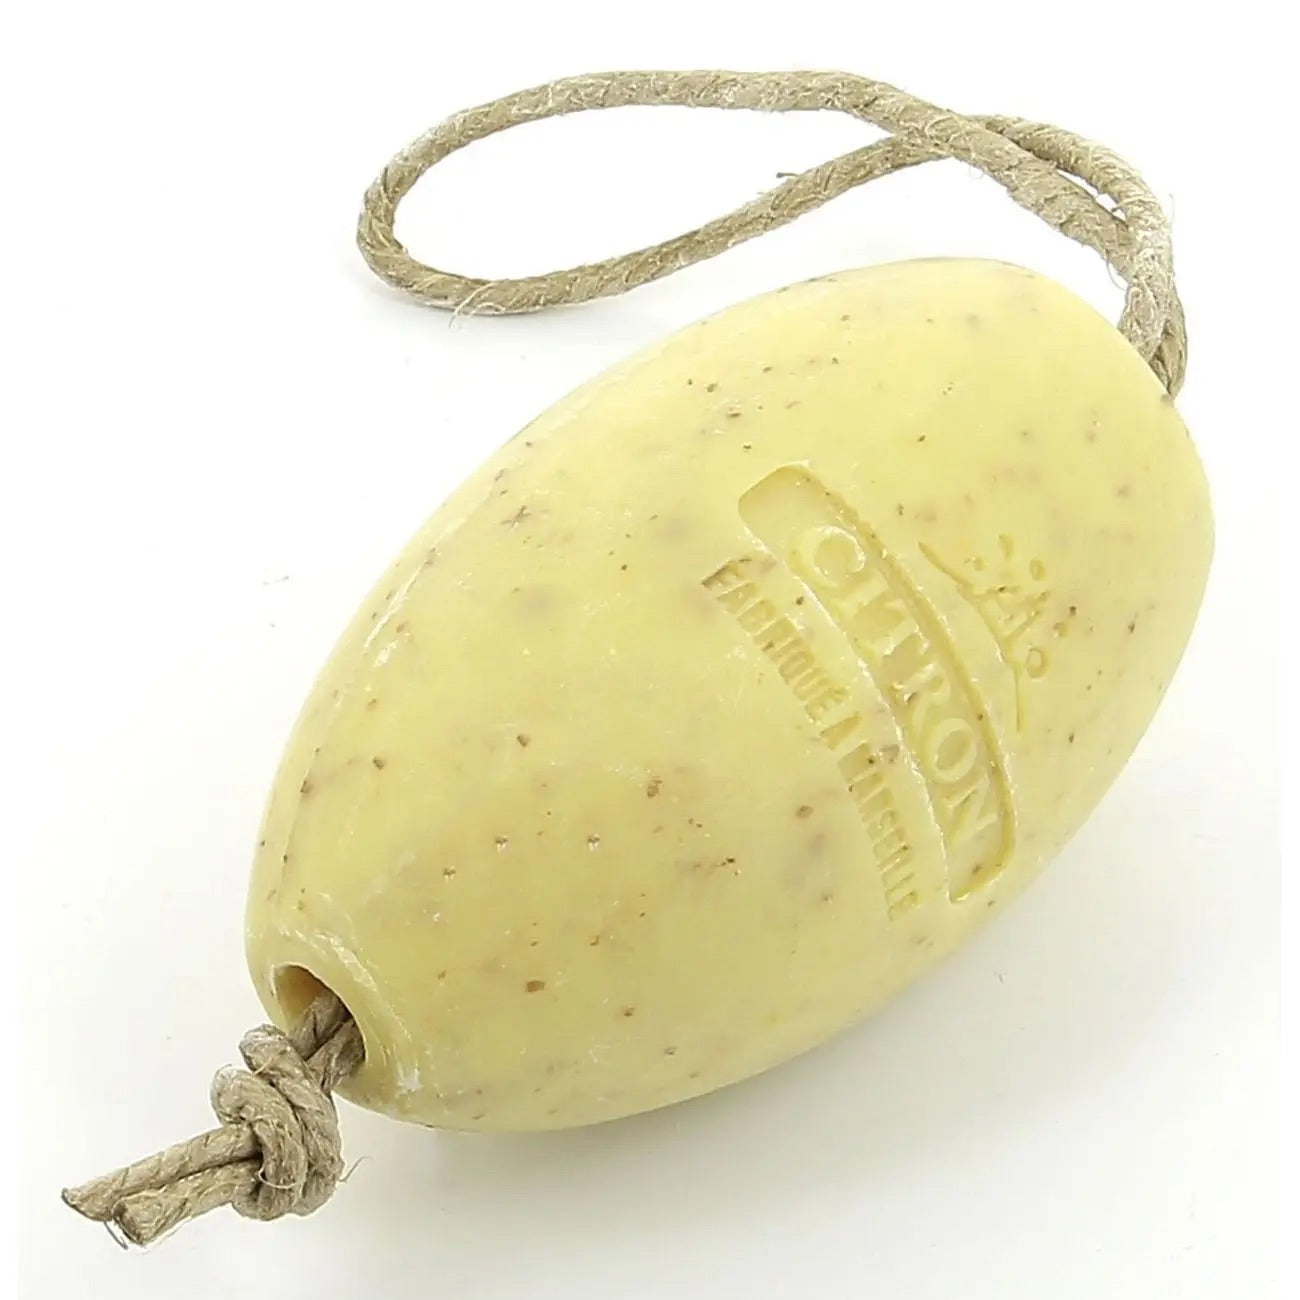 French Soap on a Rope - Citron Broye ( lemon)